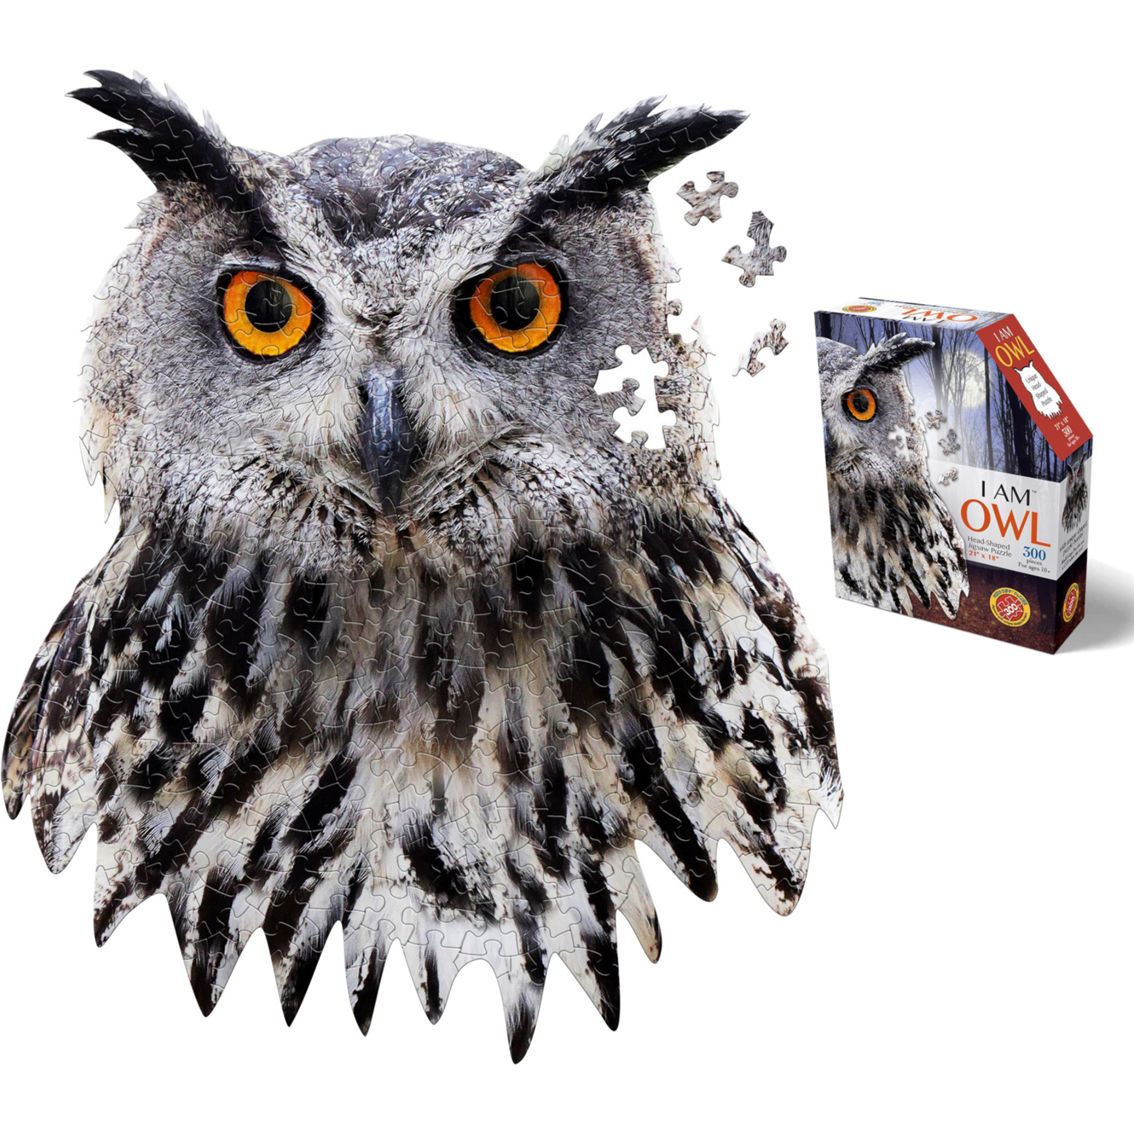 Madd Capp: I Am Owl 300 pc. Puzzle - Image 4 of 5